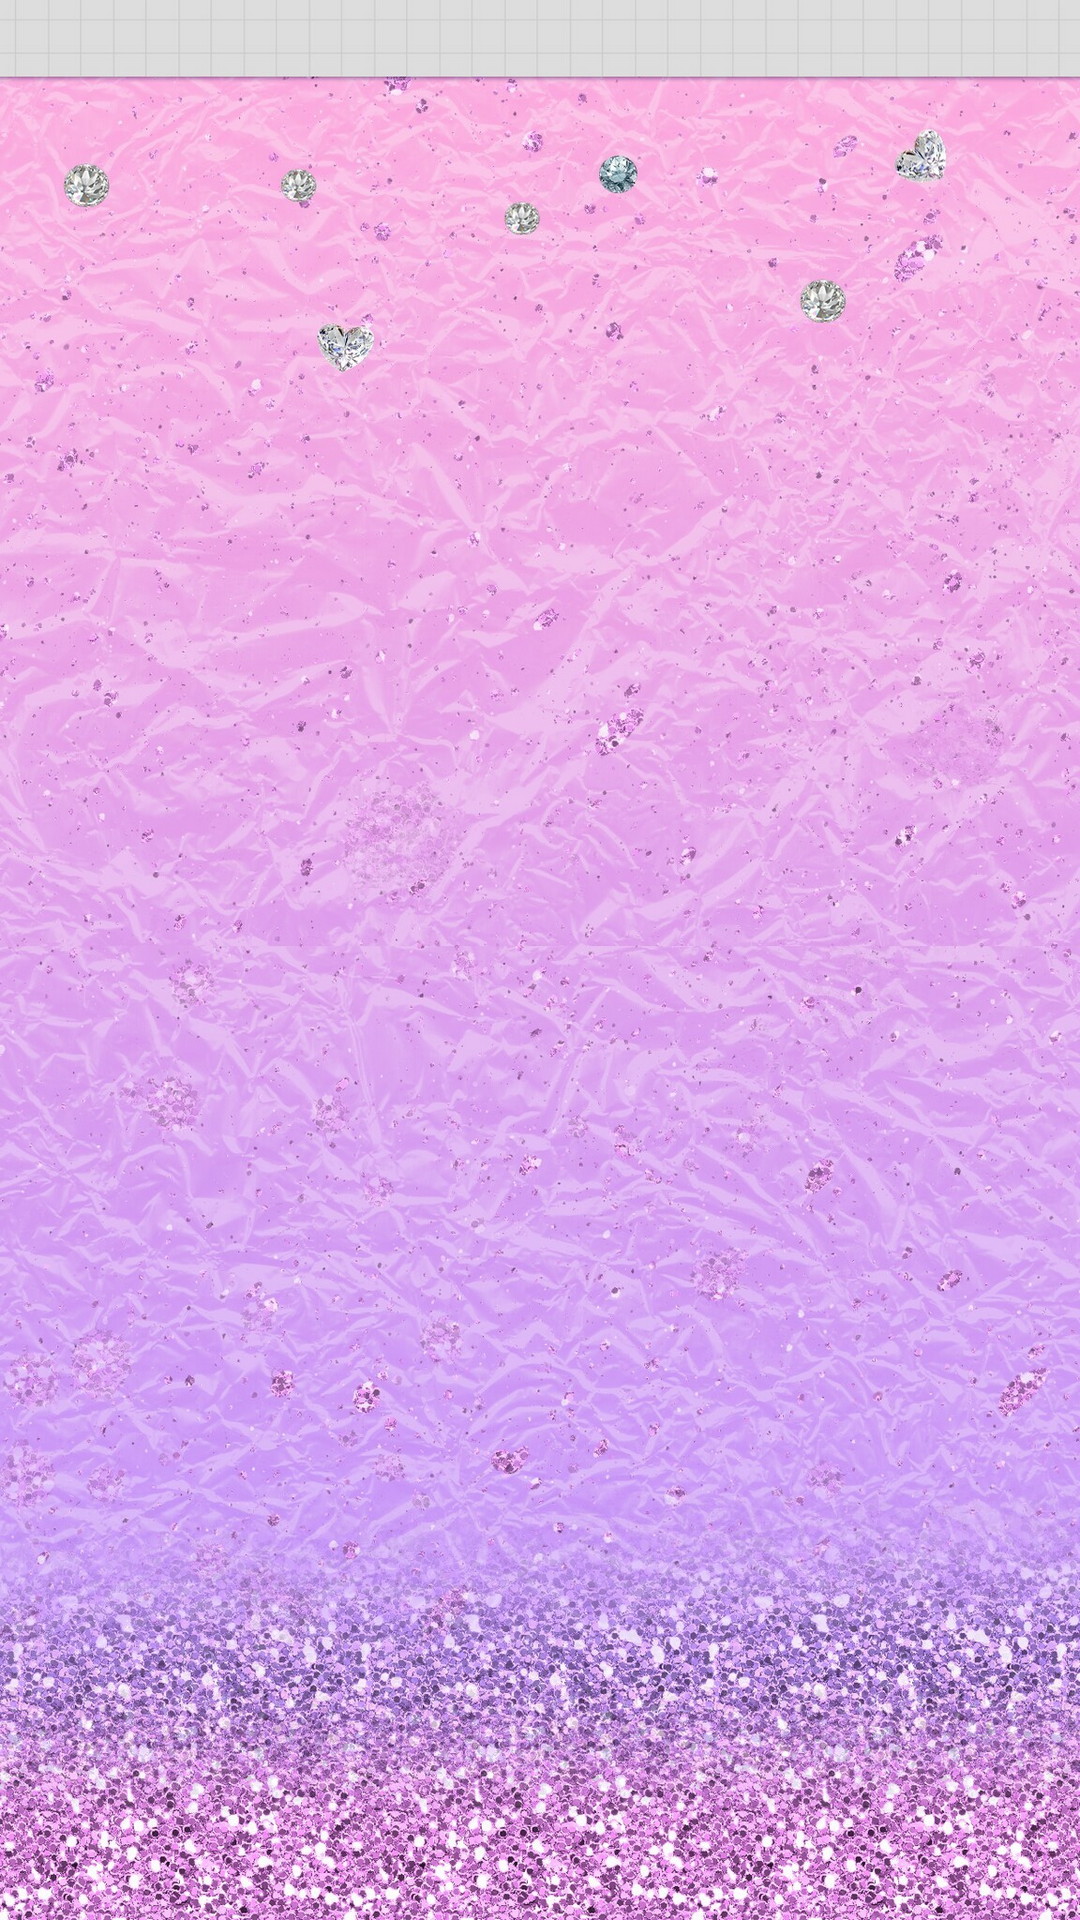 Wallpaper Cute Purple Aesthetic iPhone With high-resolution 1080X1920 pixel. You can use this wallpaper for your iPhone 5, 6, 7, 8, X, XS, XR backgrounds, Mobile Screensaver, or iPad Lock Screen